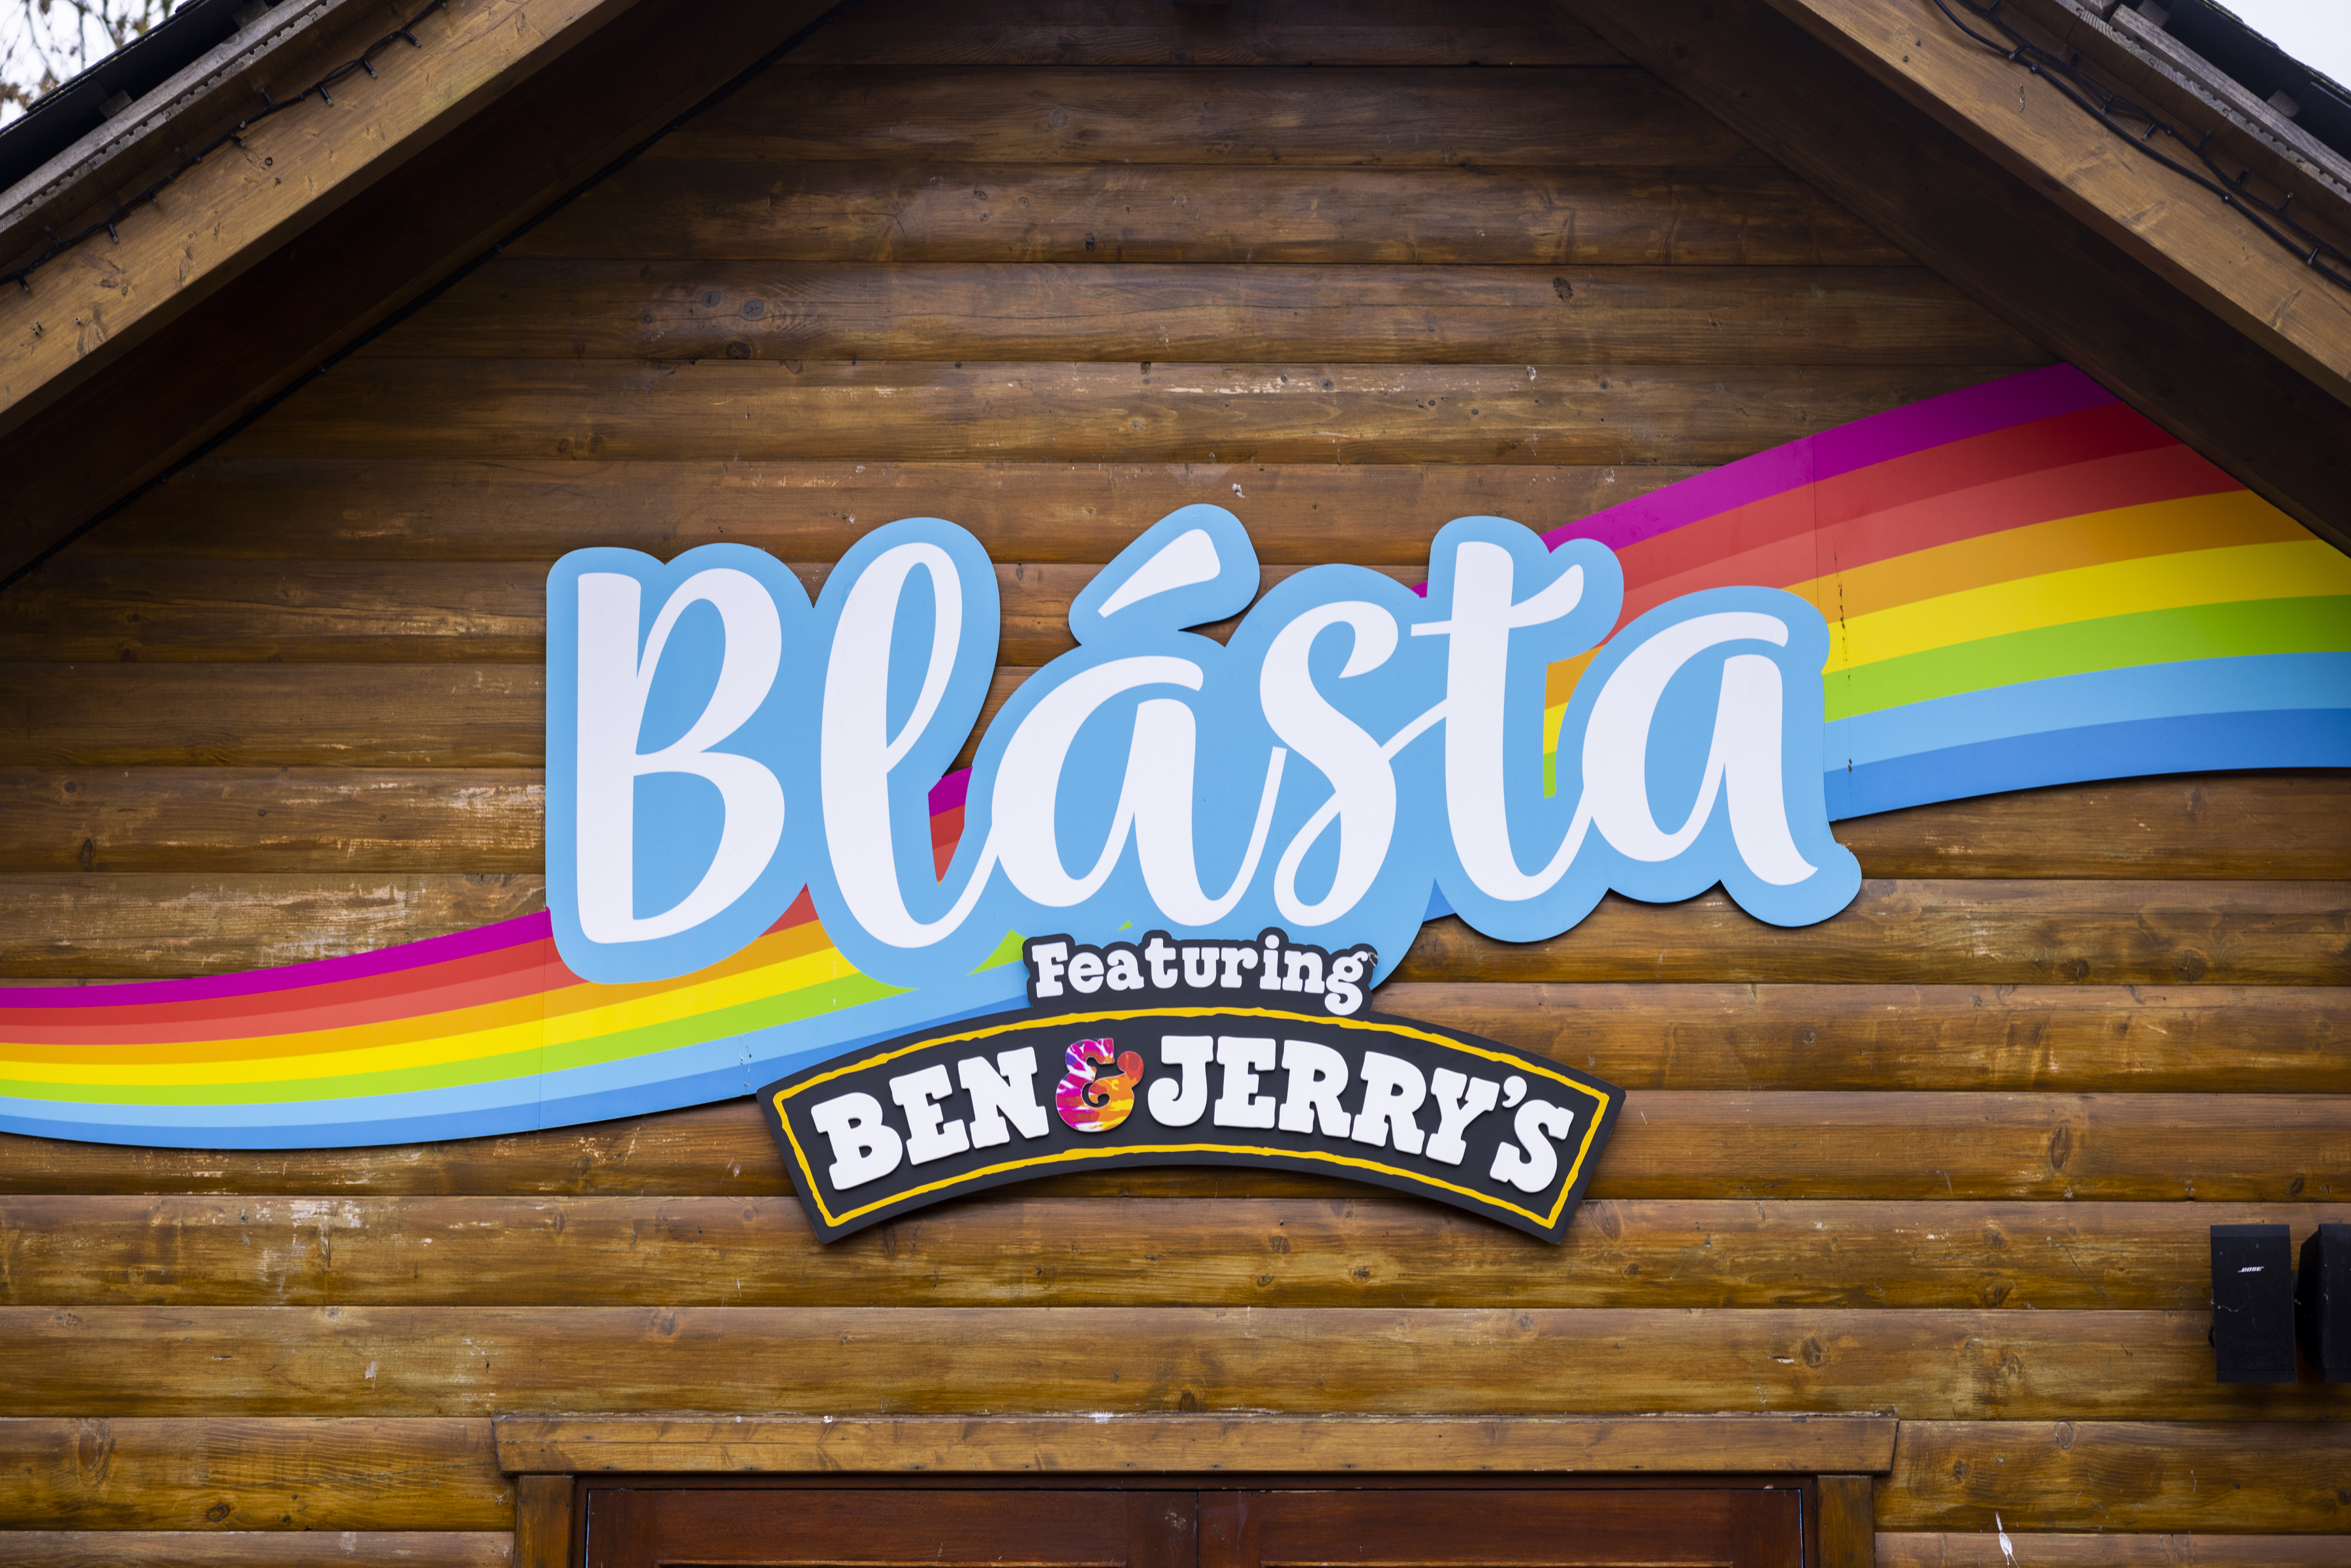 the outside of a wooden ice cream parlour called 'Blásta featuring Ben & Jerry's'